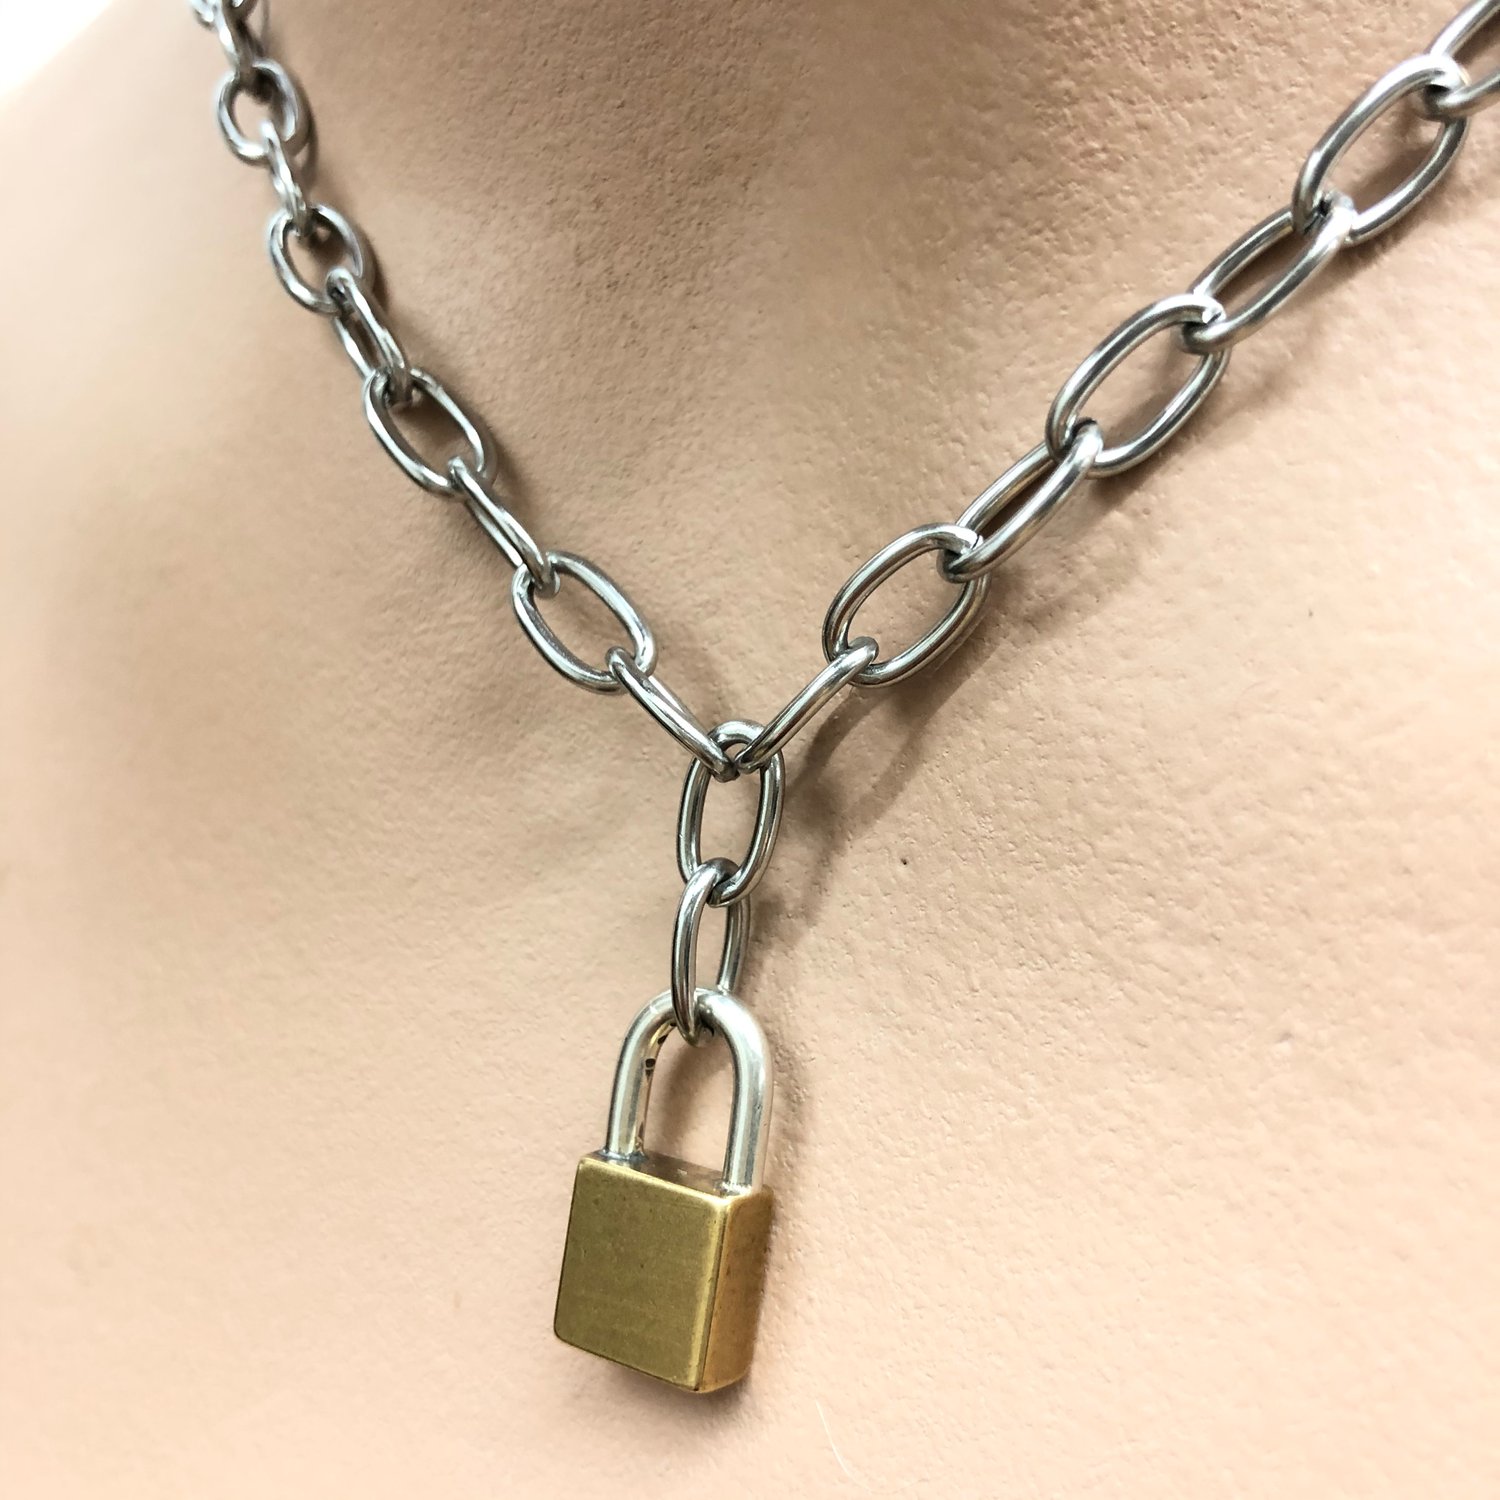 Oversized Padlock Necklace Solid Stainless Steel Chain Silver